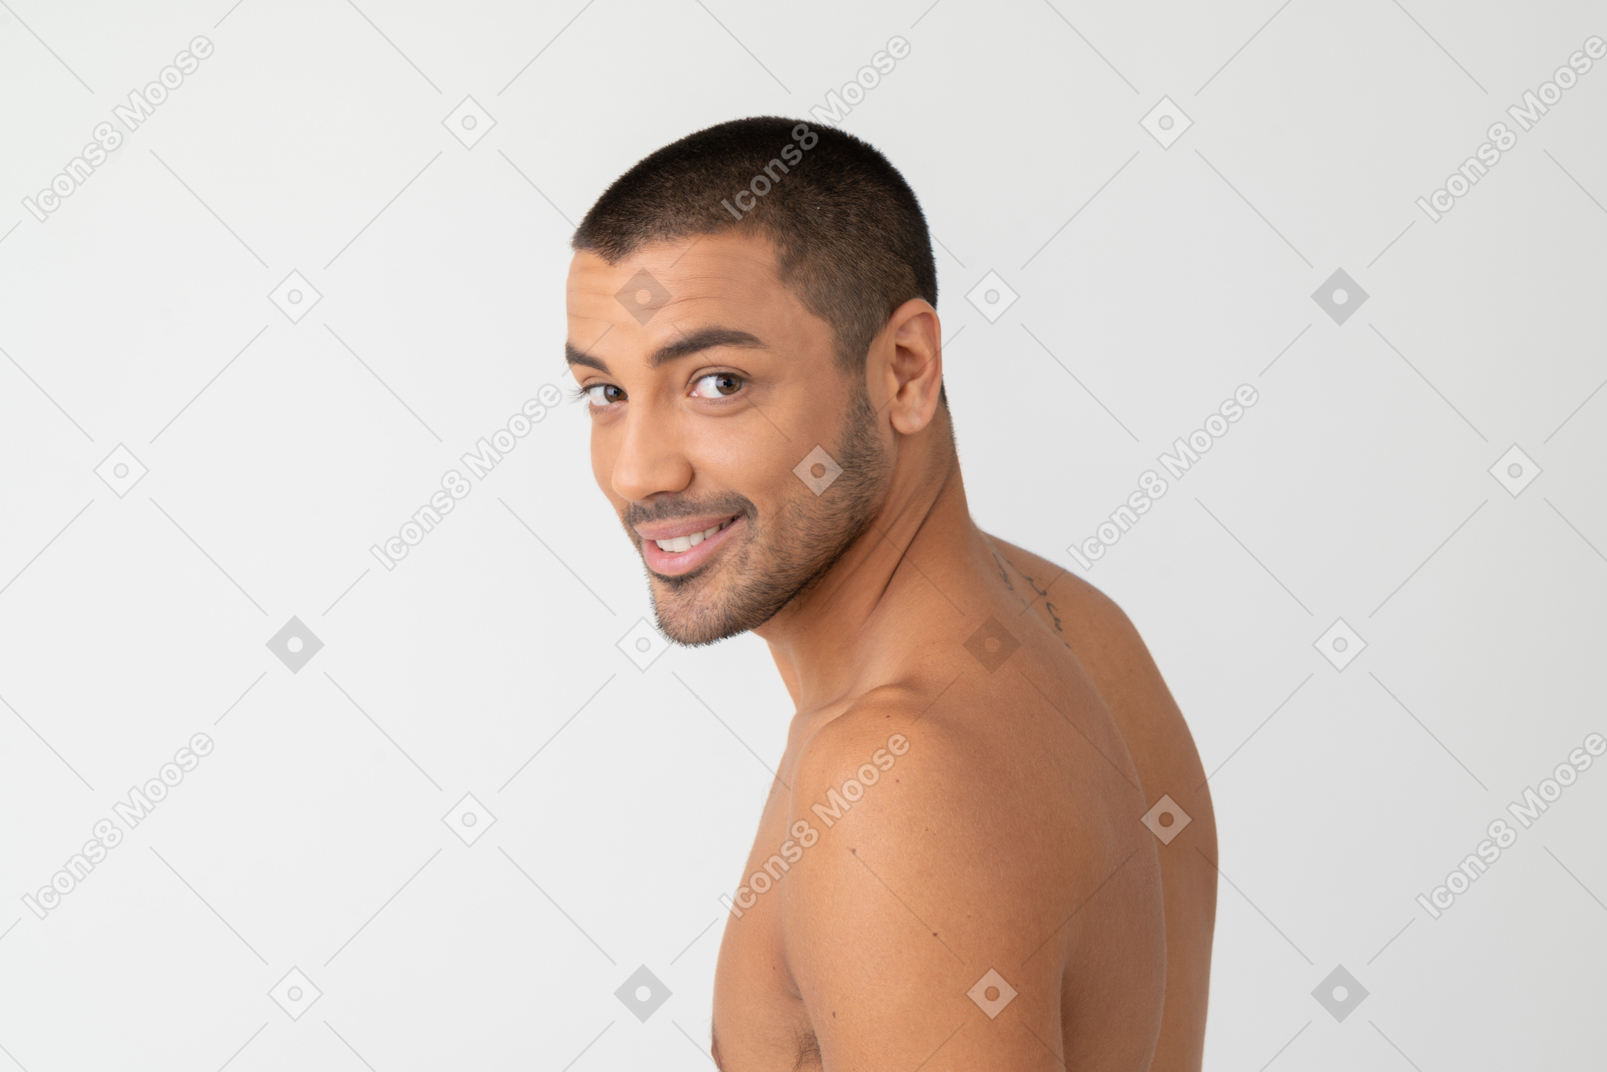 Barechested handsome young man turning his head